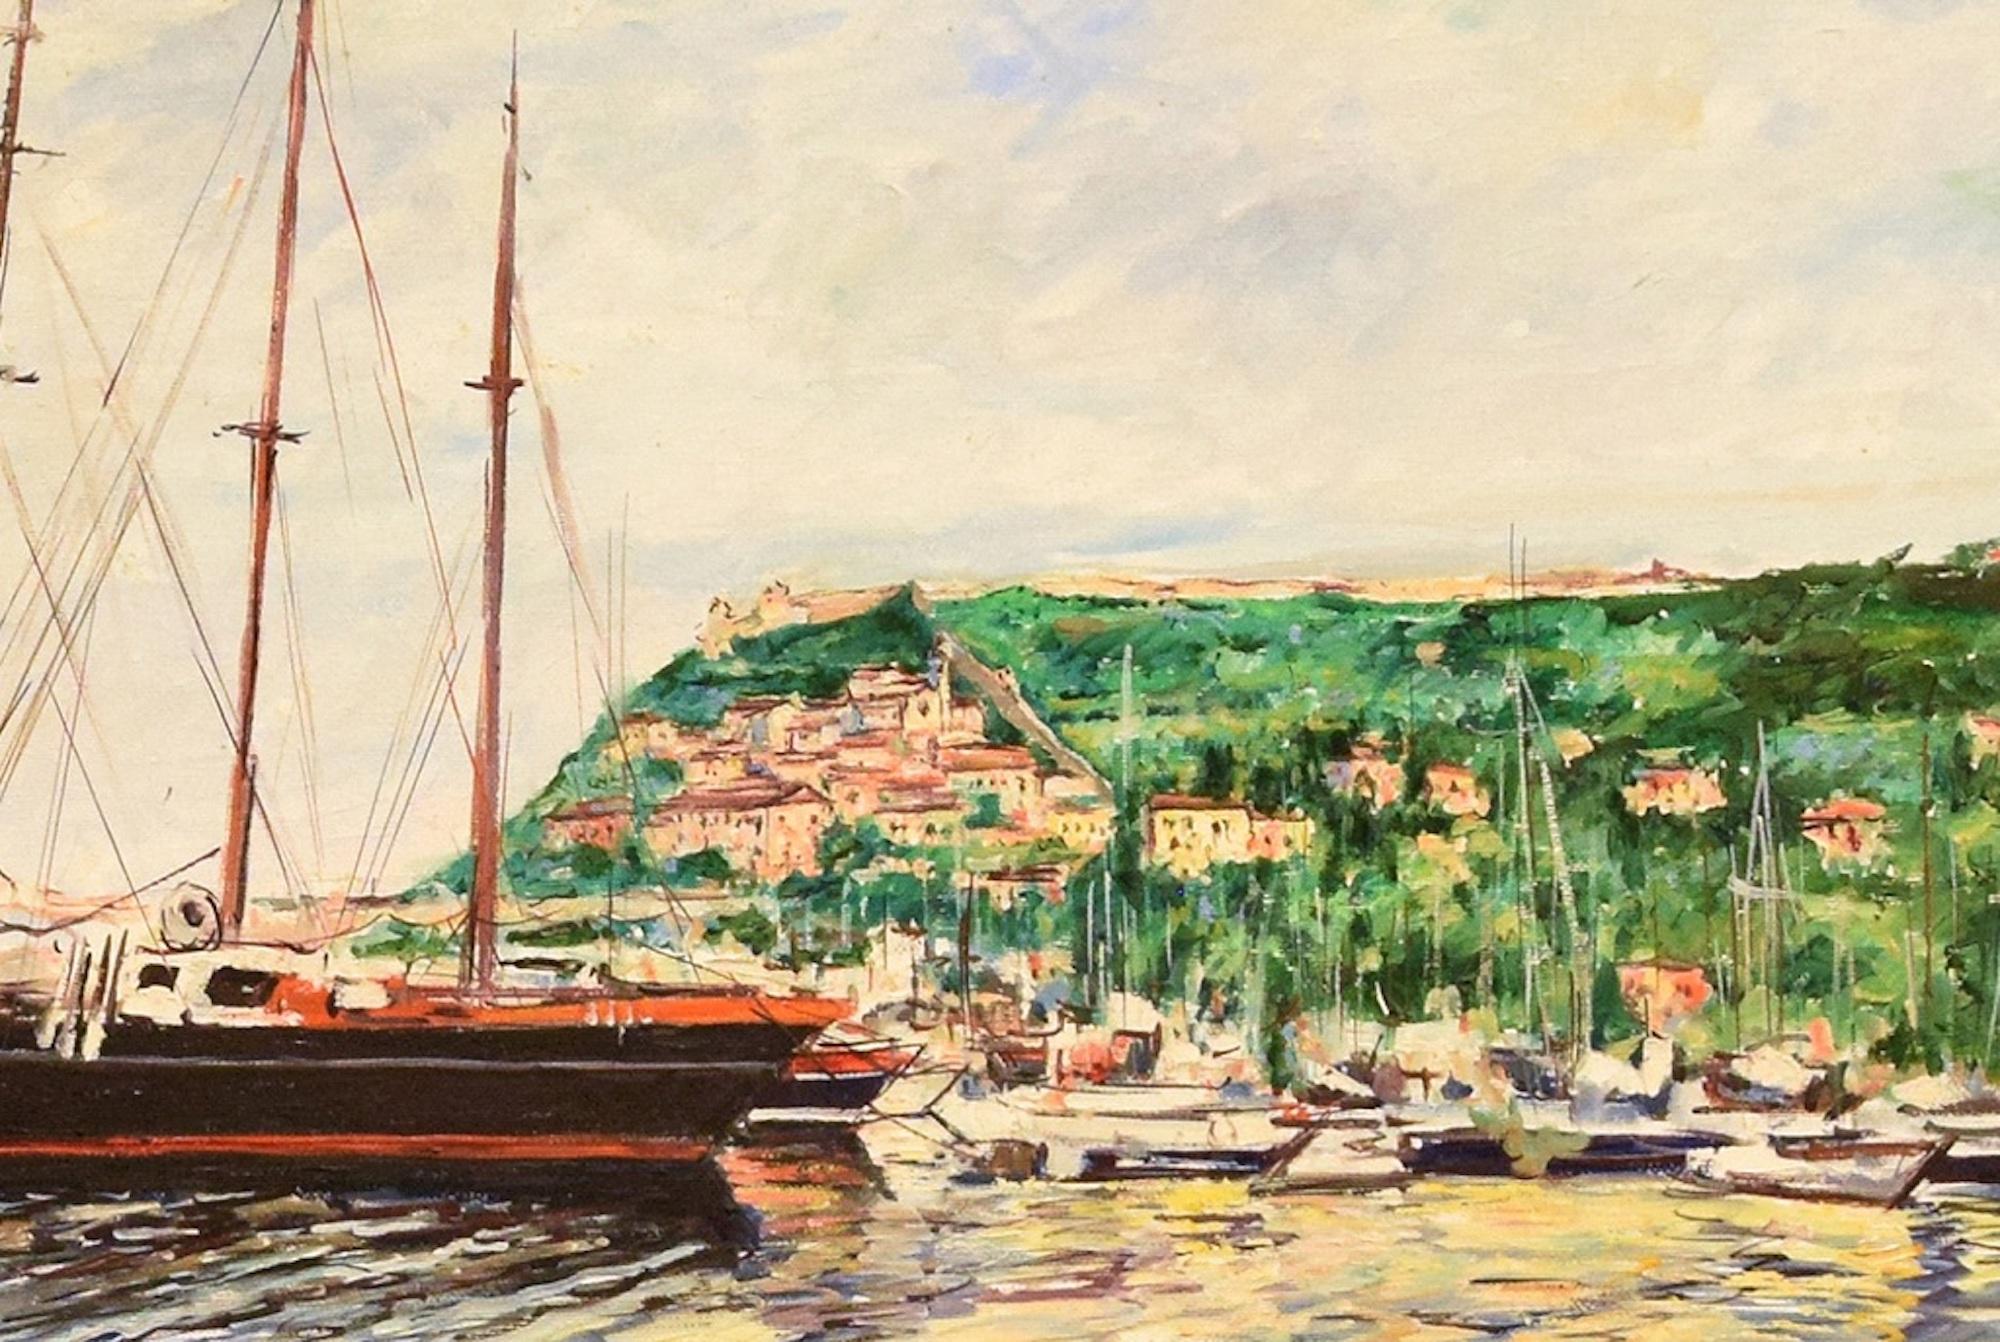 View of Isola d'Elba - Oil on Canvas by Luciano Sacco - 1970s For Sale 1